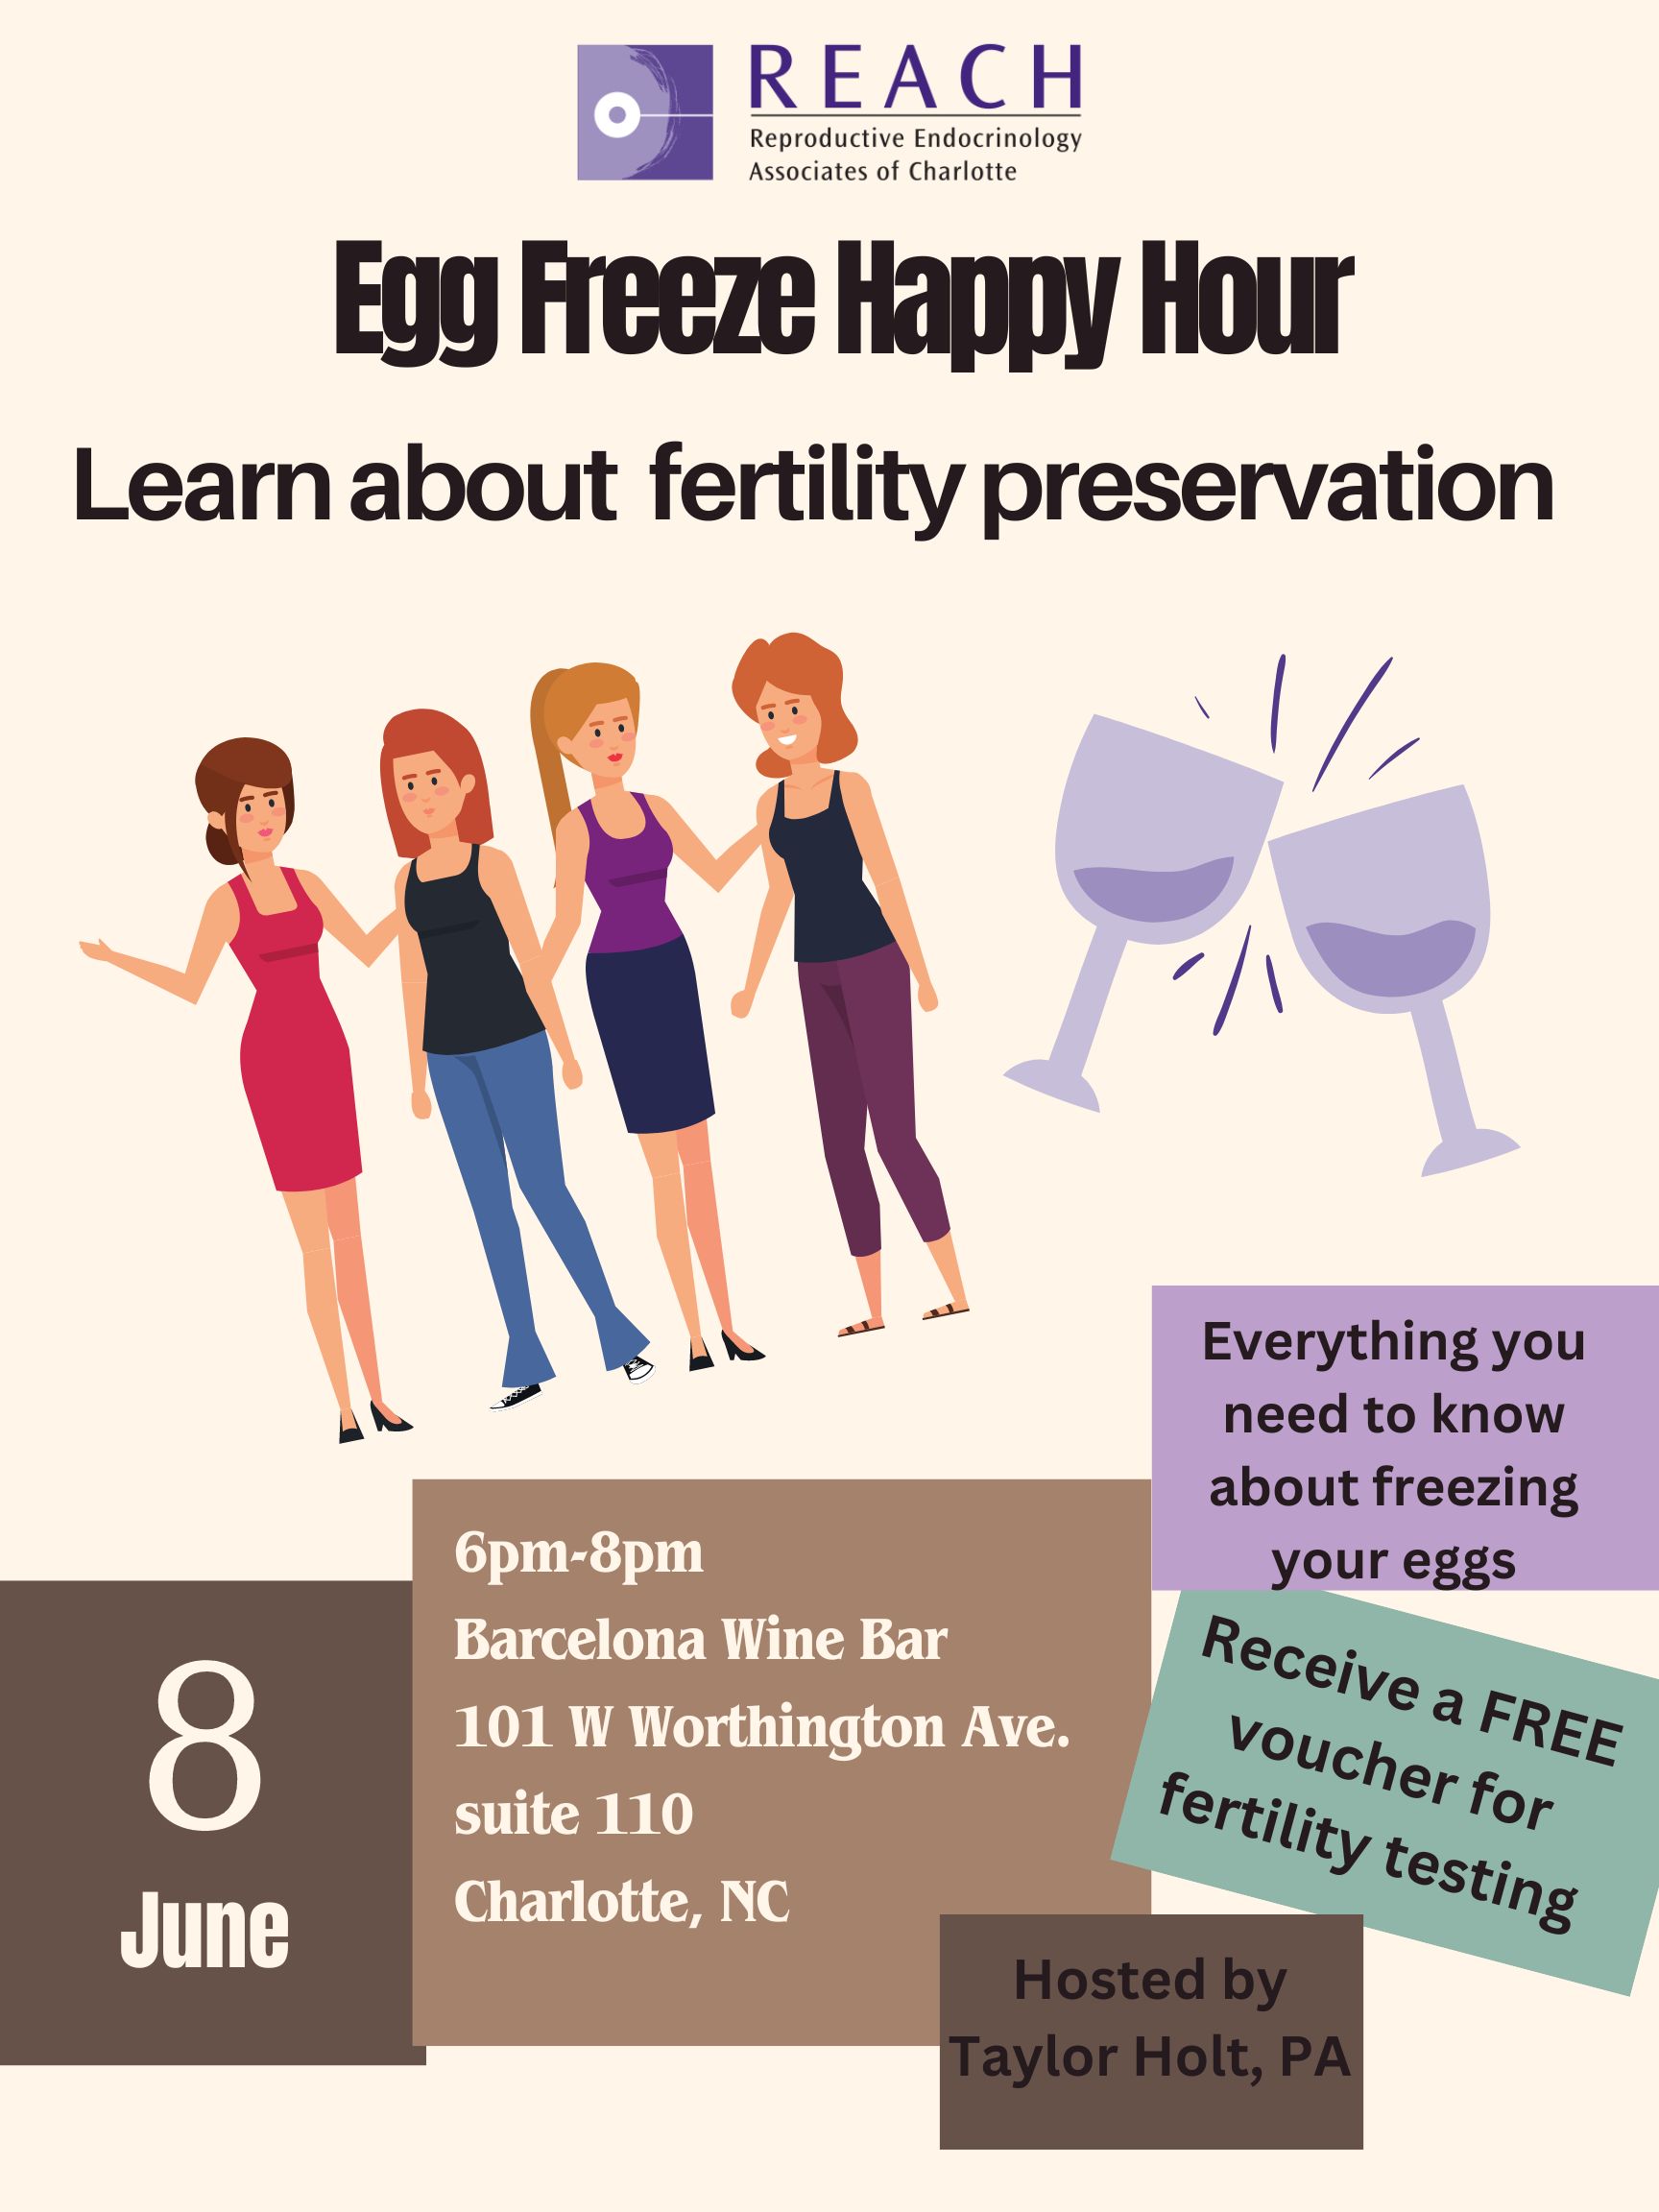 Join us for a Fertility Preservation Info Session